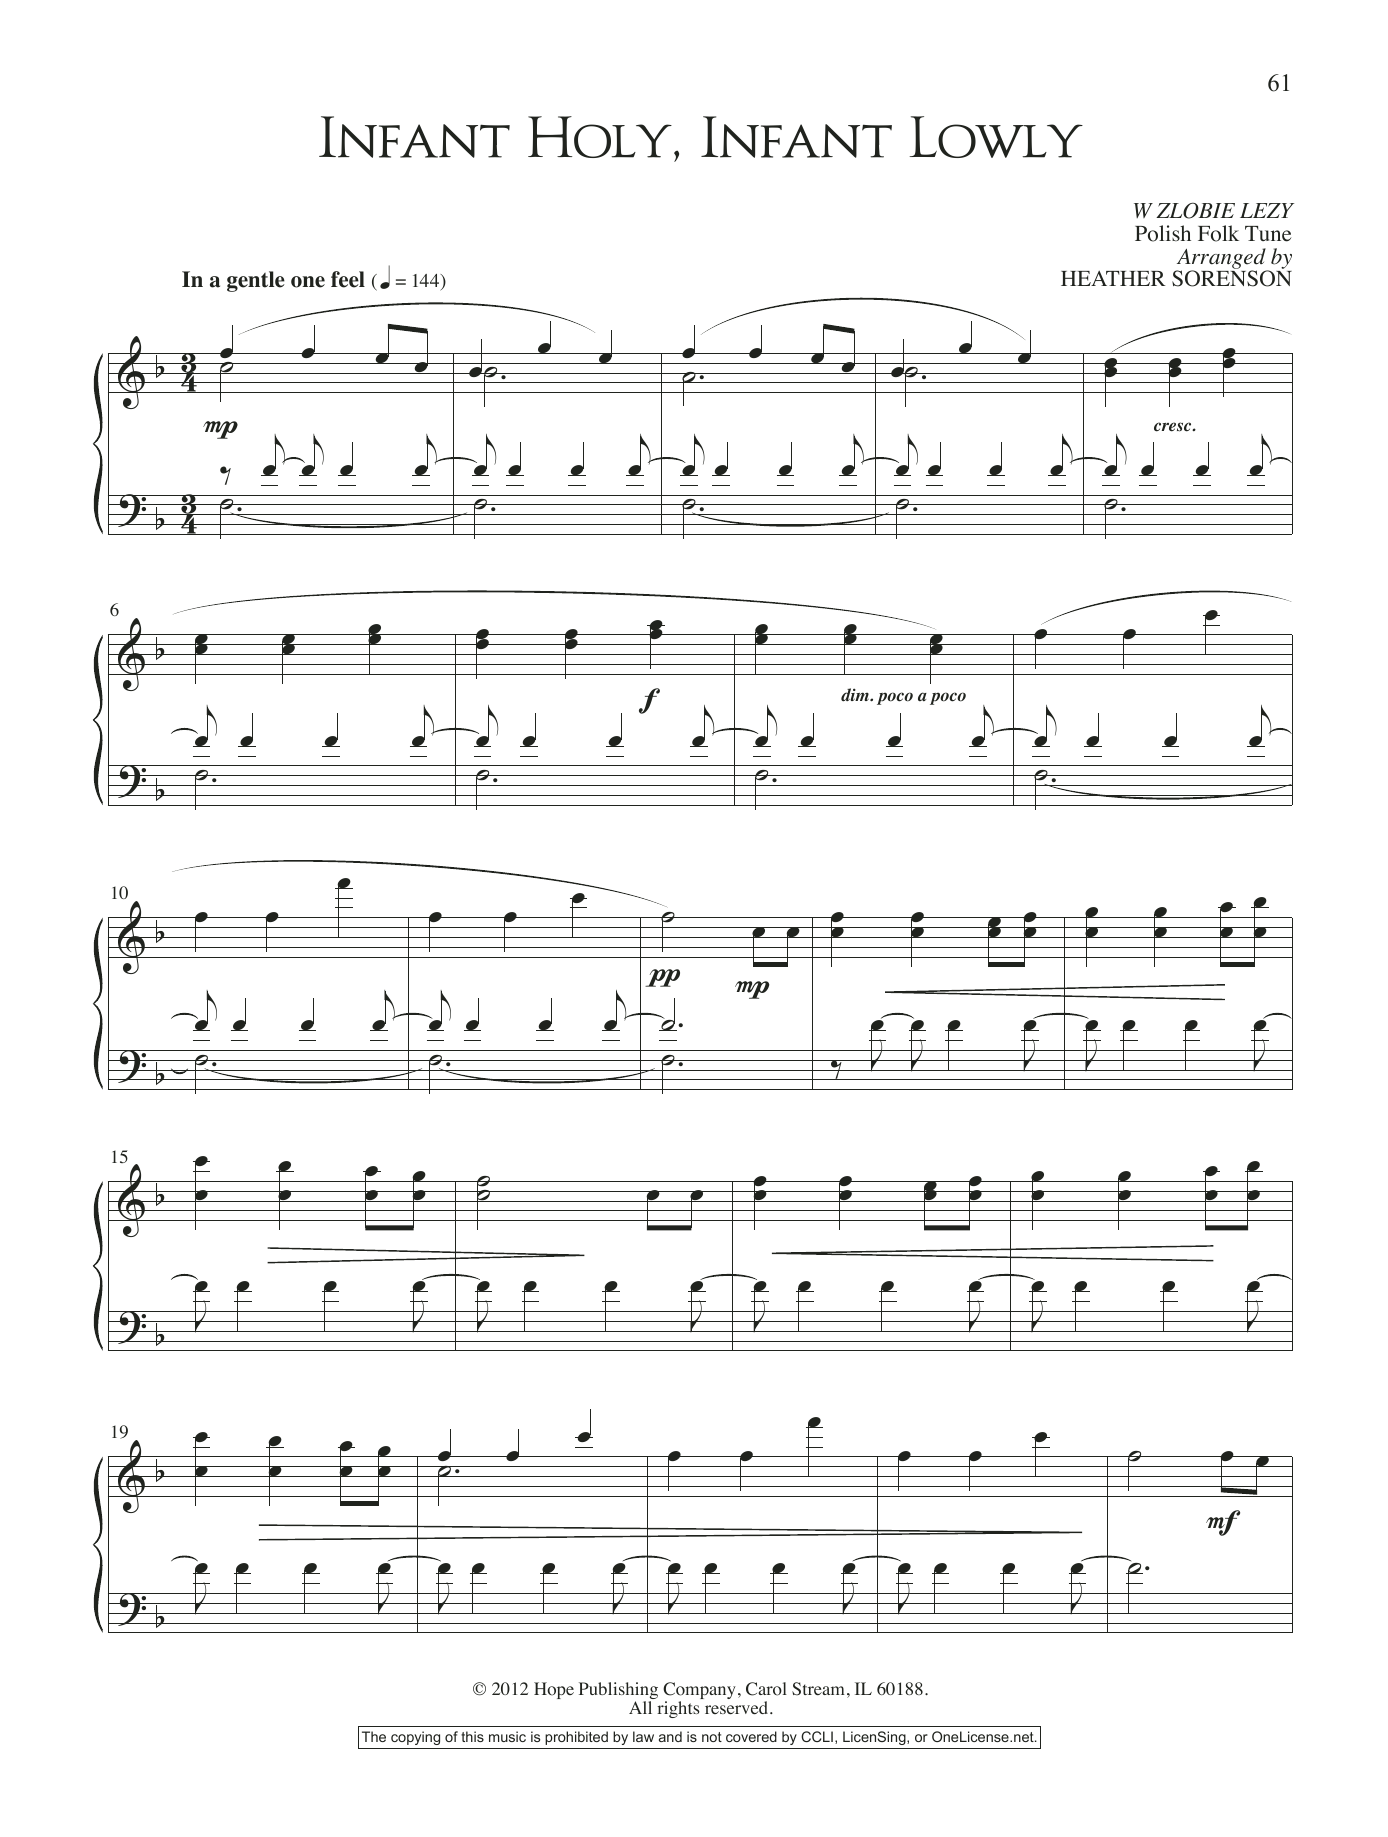 Download Heather Sorenson Infant Holy, Infant Lowly Sheet Music